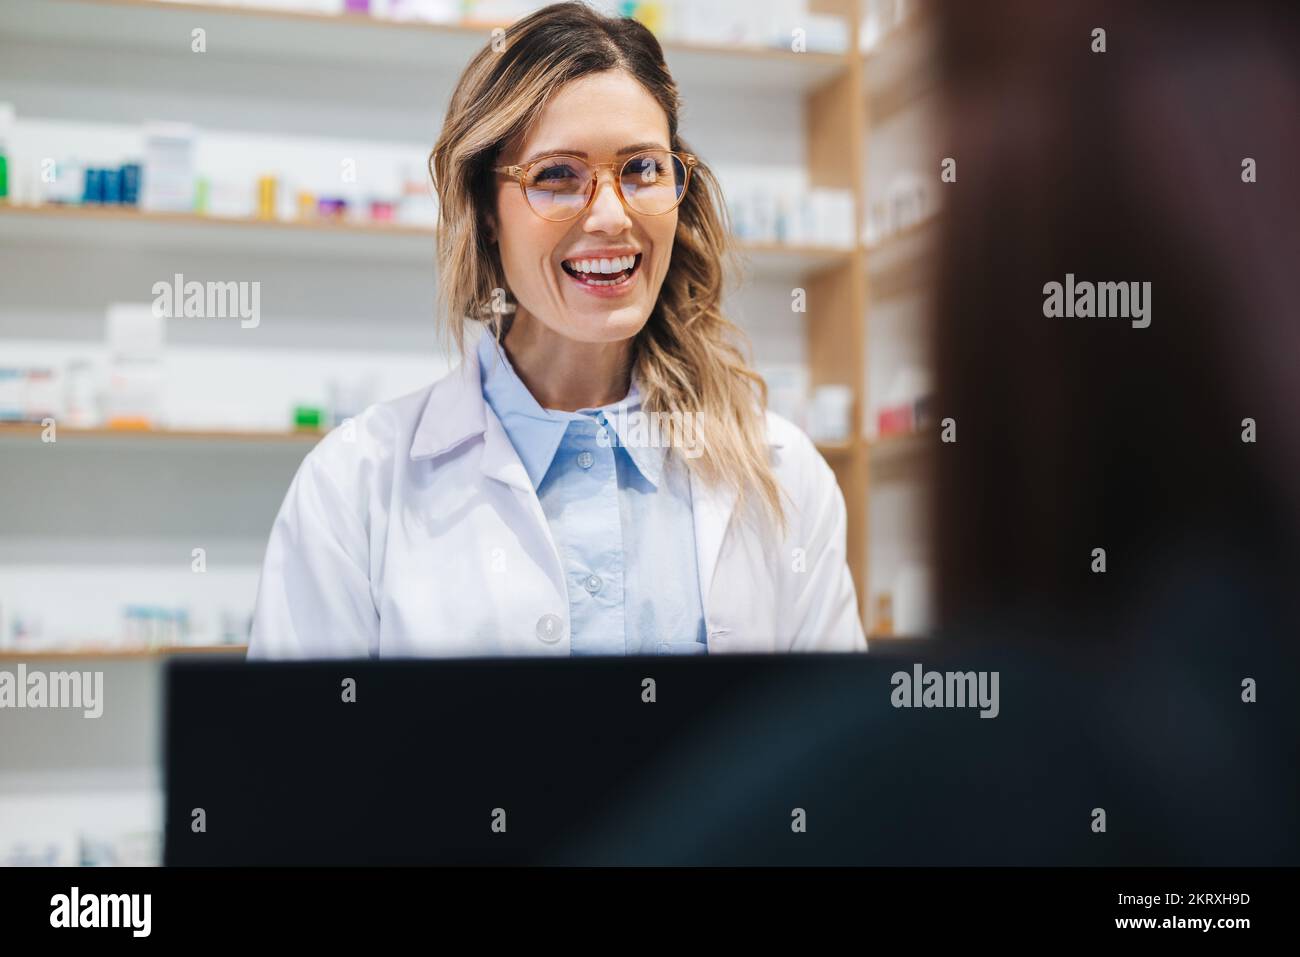 Woman assisting a patient over the counter in a pharmacy. Female healthcare provider dispensing medication in a drug store. Stock Photo